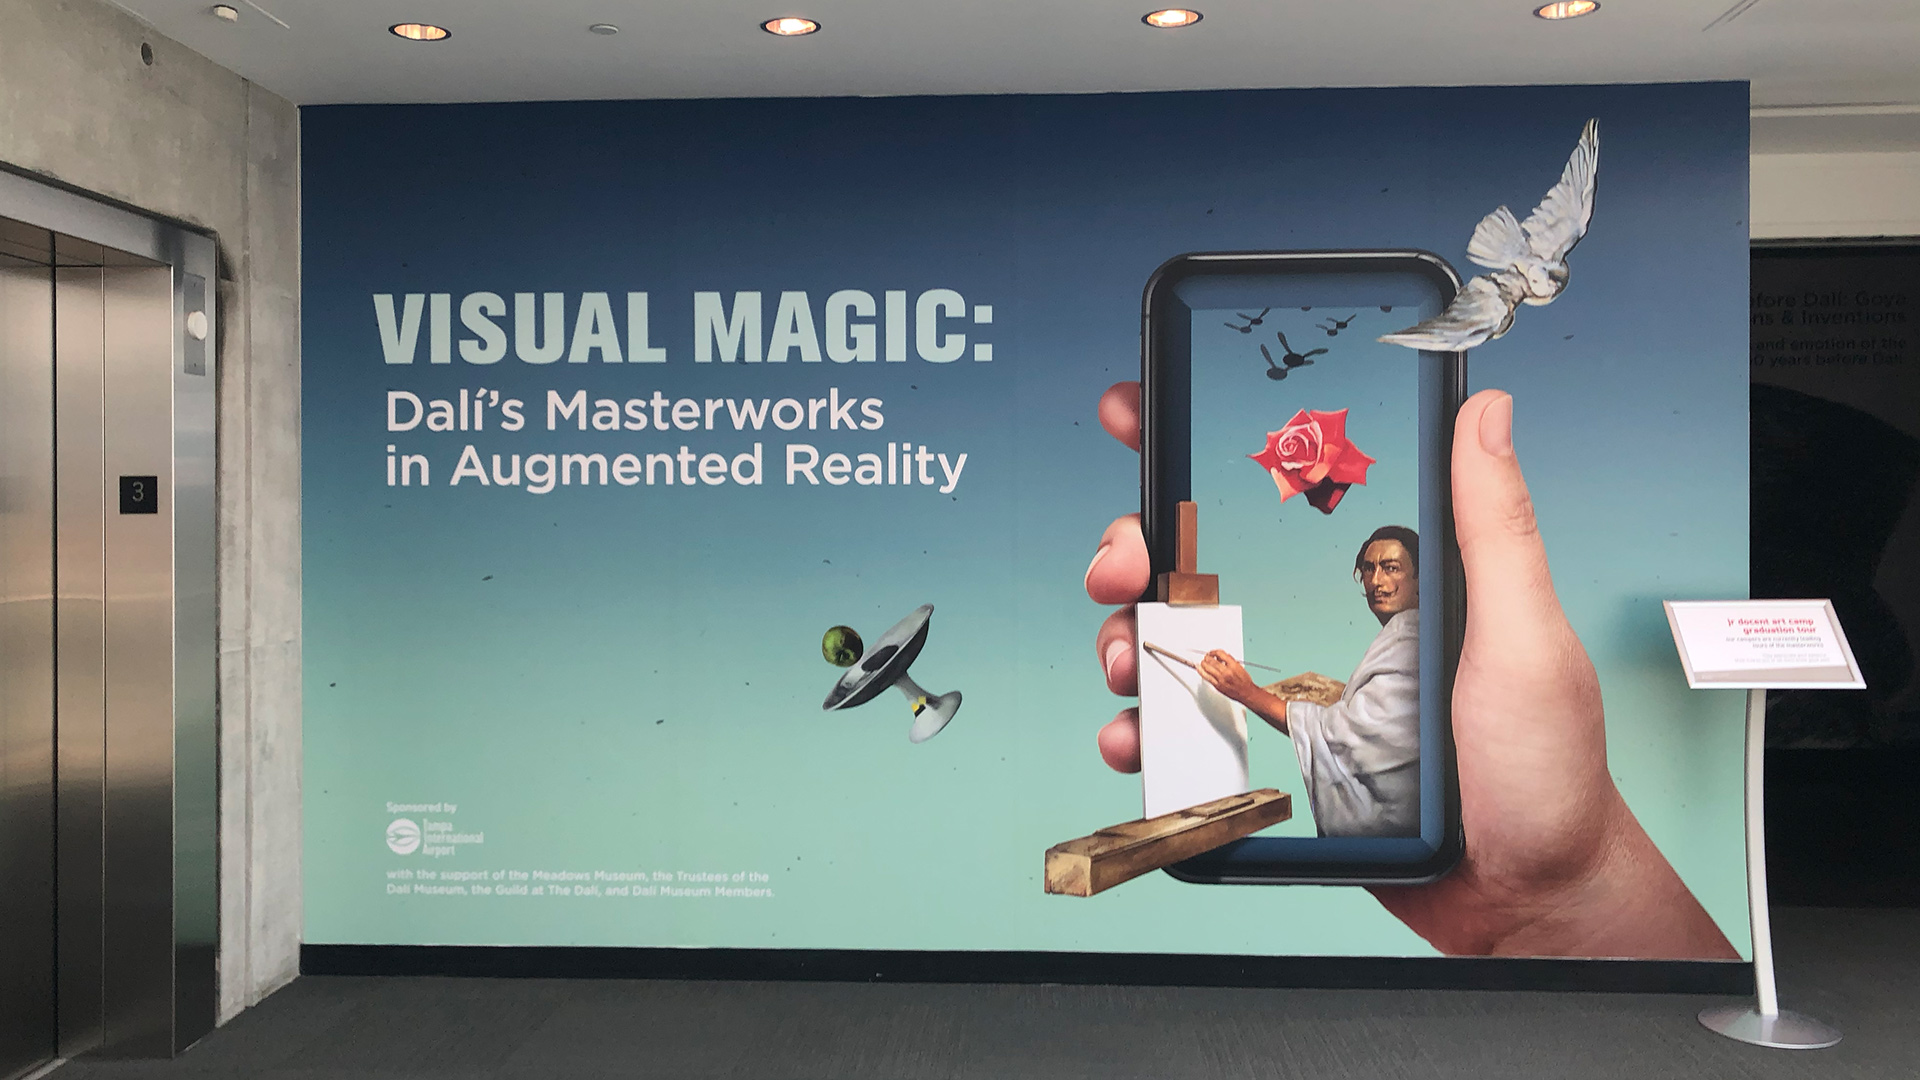 The sign for "Visual Magic: Dali's Masterpieces in Augmented Reality"